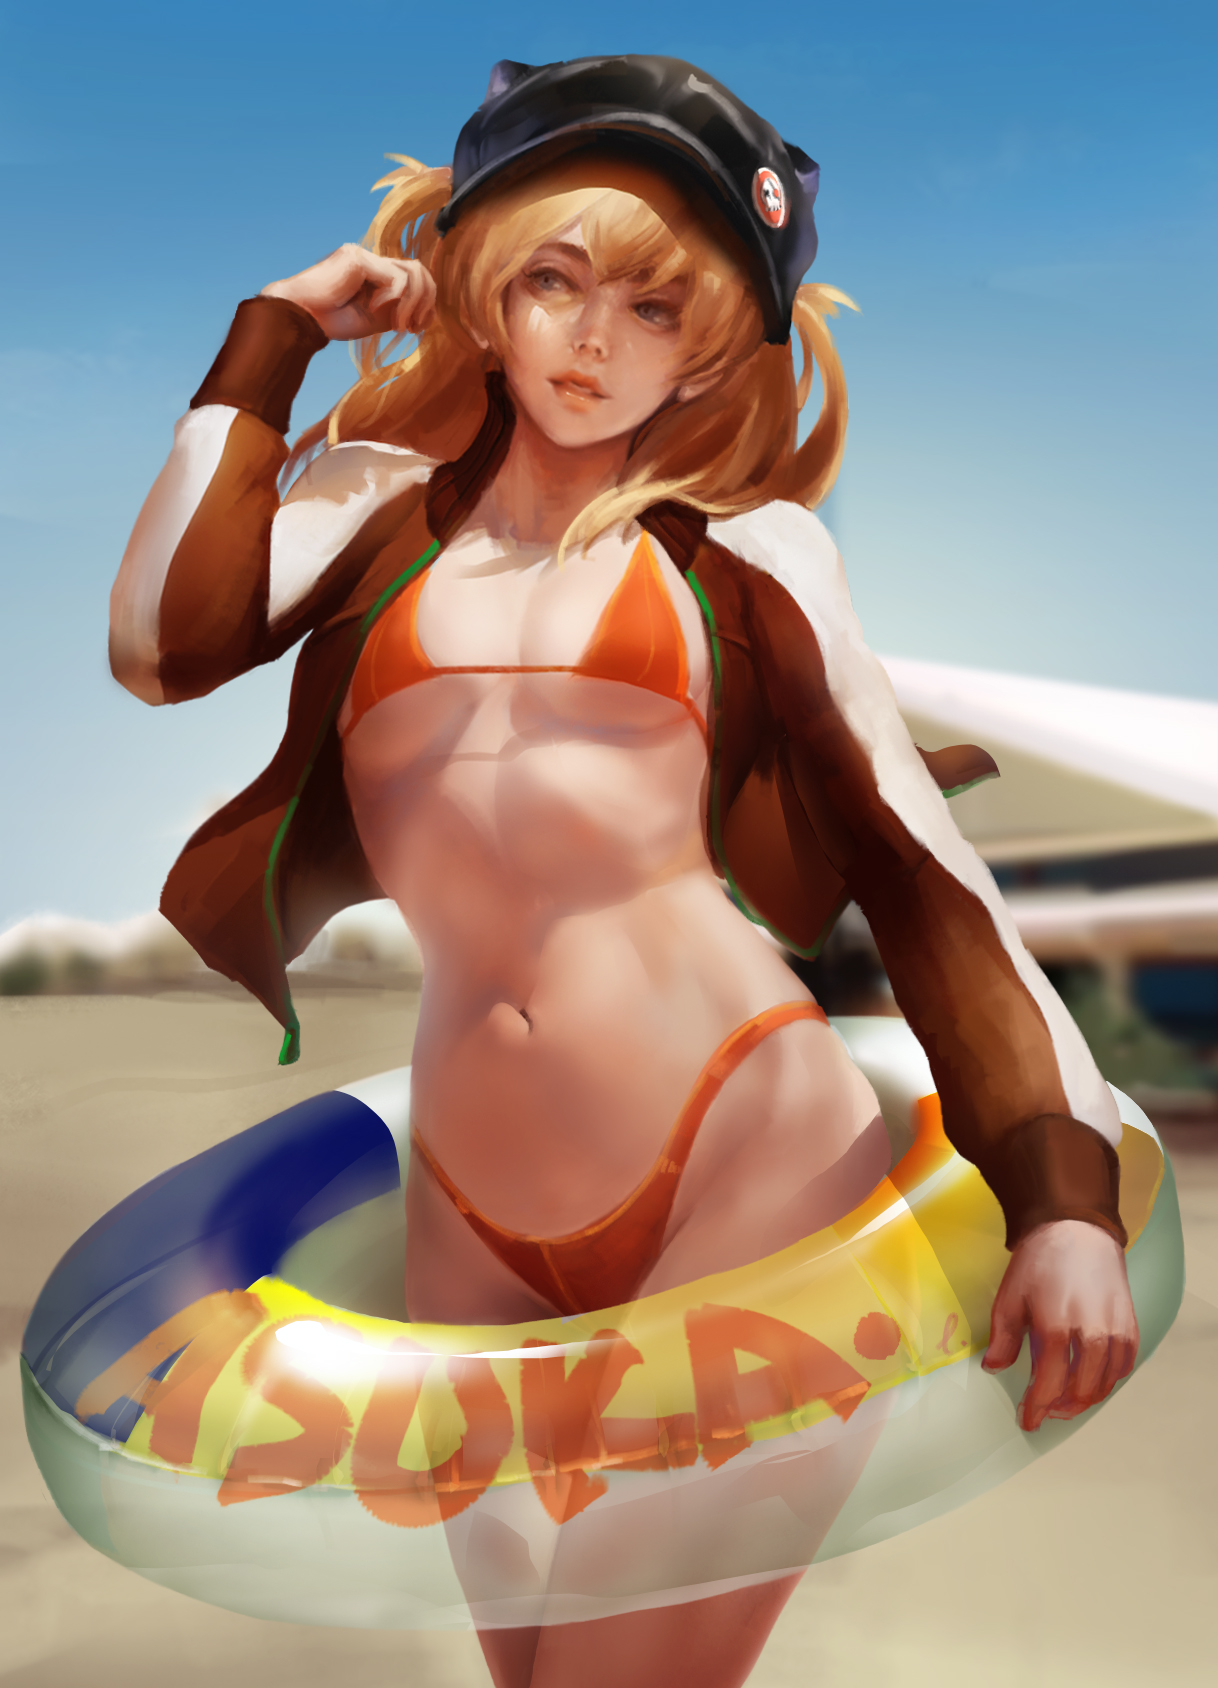 Anime 1218x1688 Neon Genesis Evangelion anime girls small boobs long hair smiling red bikini thighs red jackets black hat beach cleavage 2D redhead belly button blue eyes Asuka Langley Soryu clear sky ecchi portrait display fan art anime floater open jacket belly